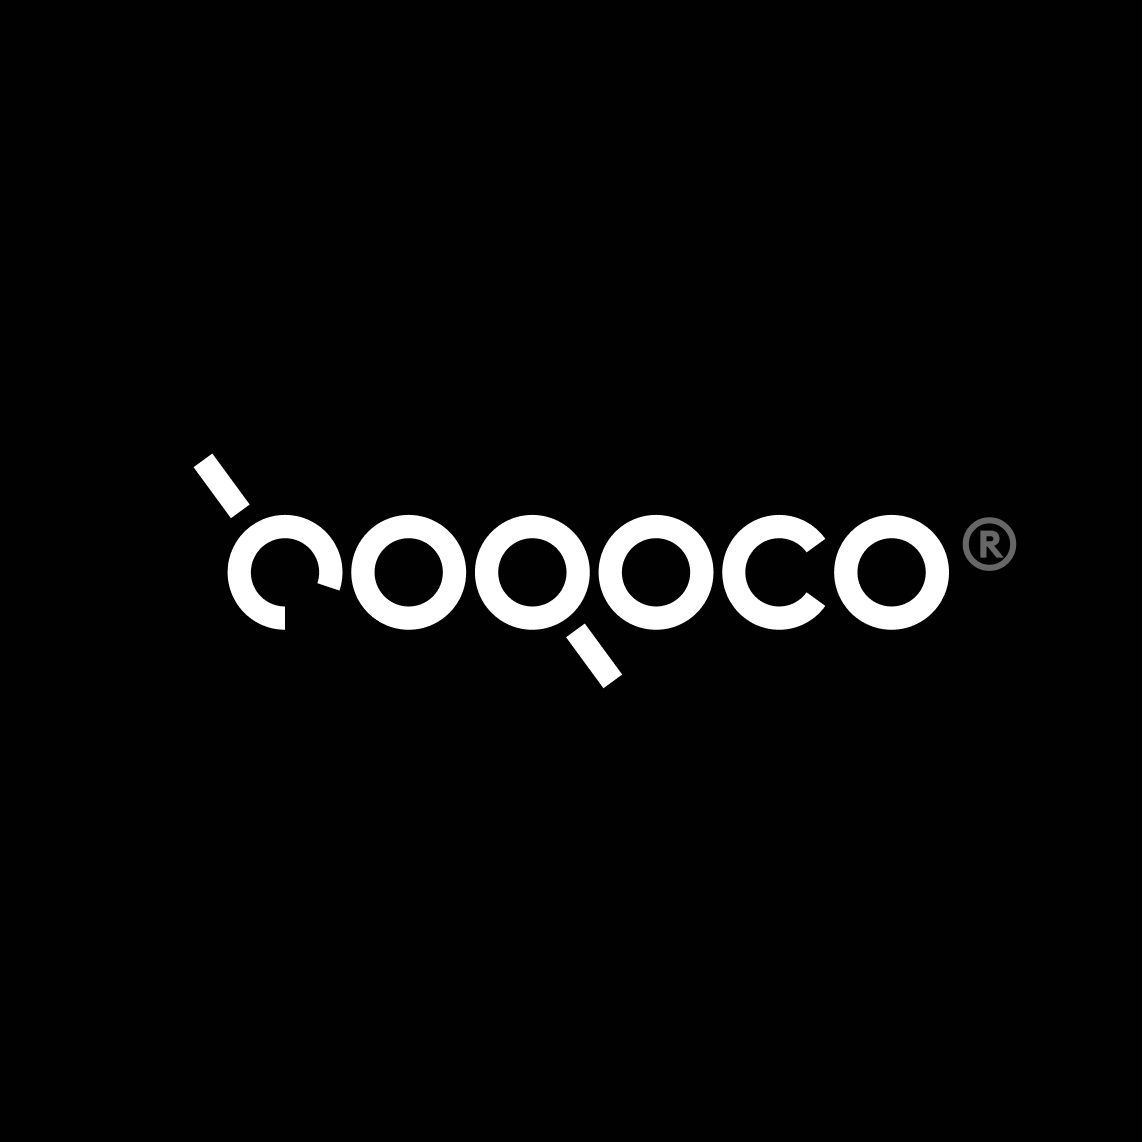  Best Design System Agency In Bangalore | Hogoco